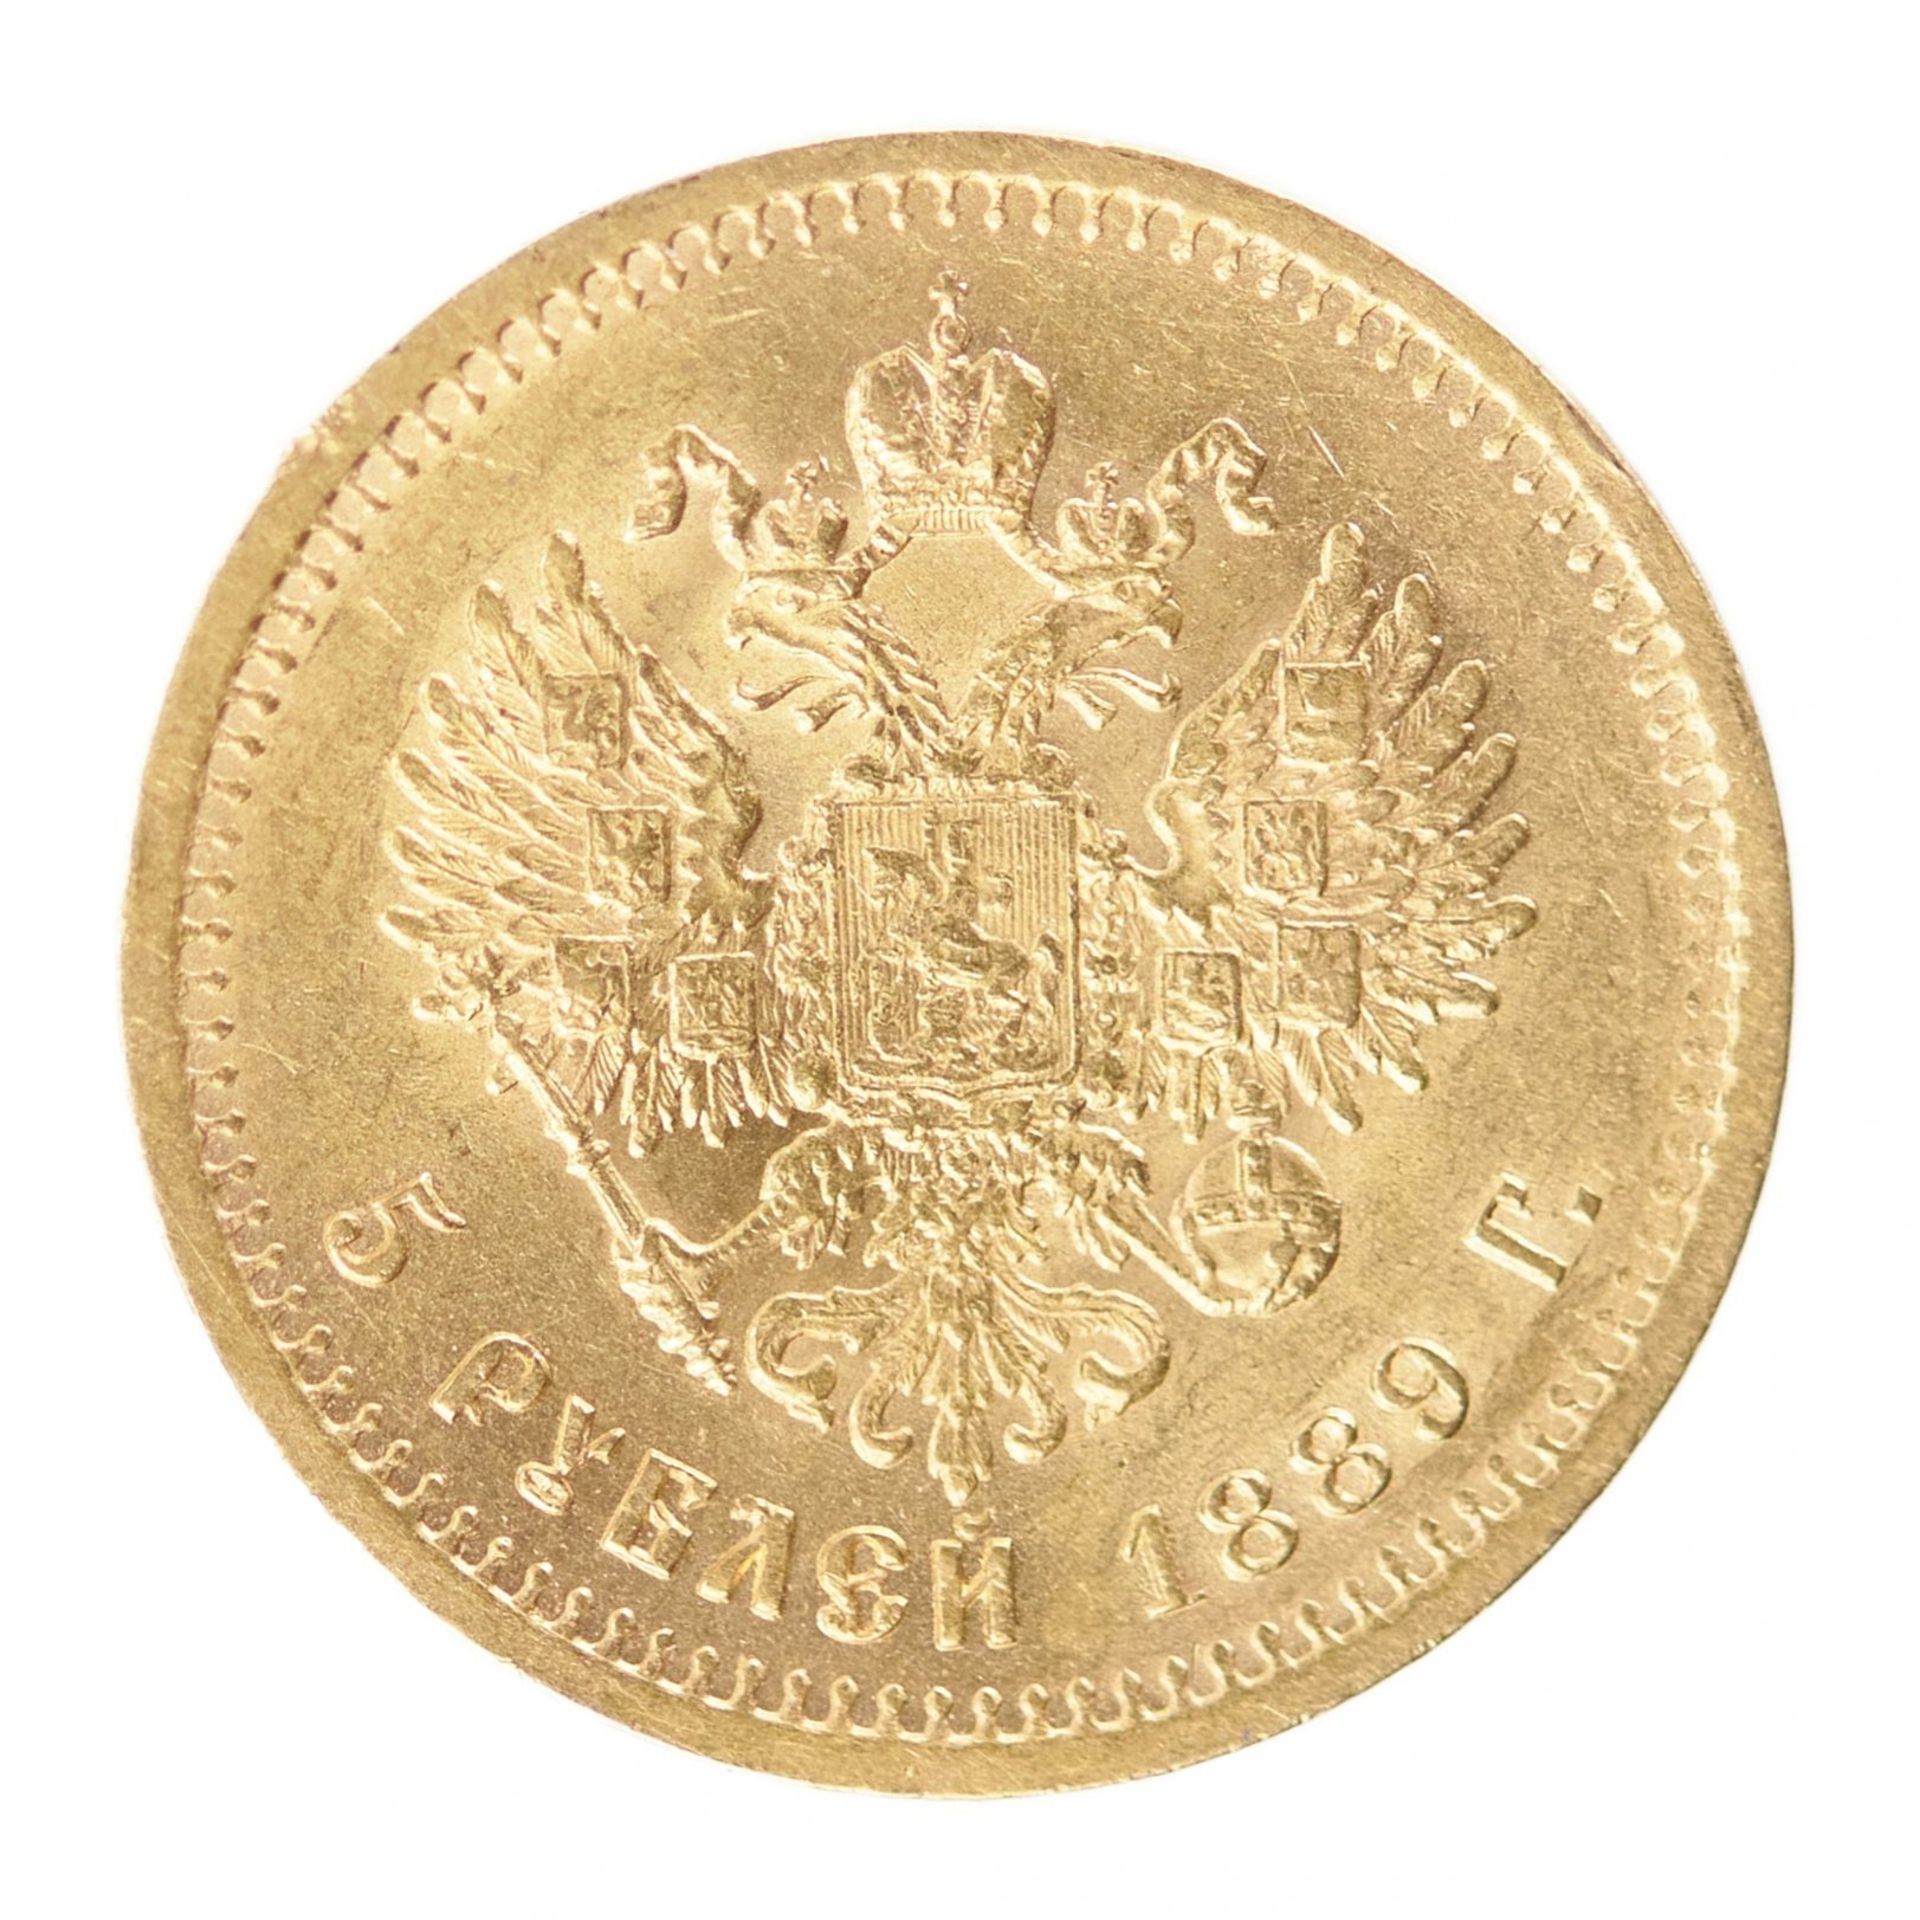 Gold coin 5 rubles of Alexander III, 1889. Russia - Image 3 of 3